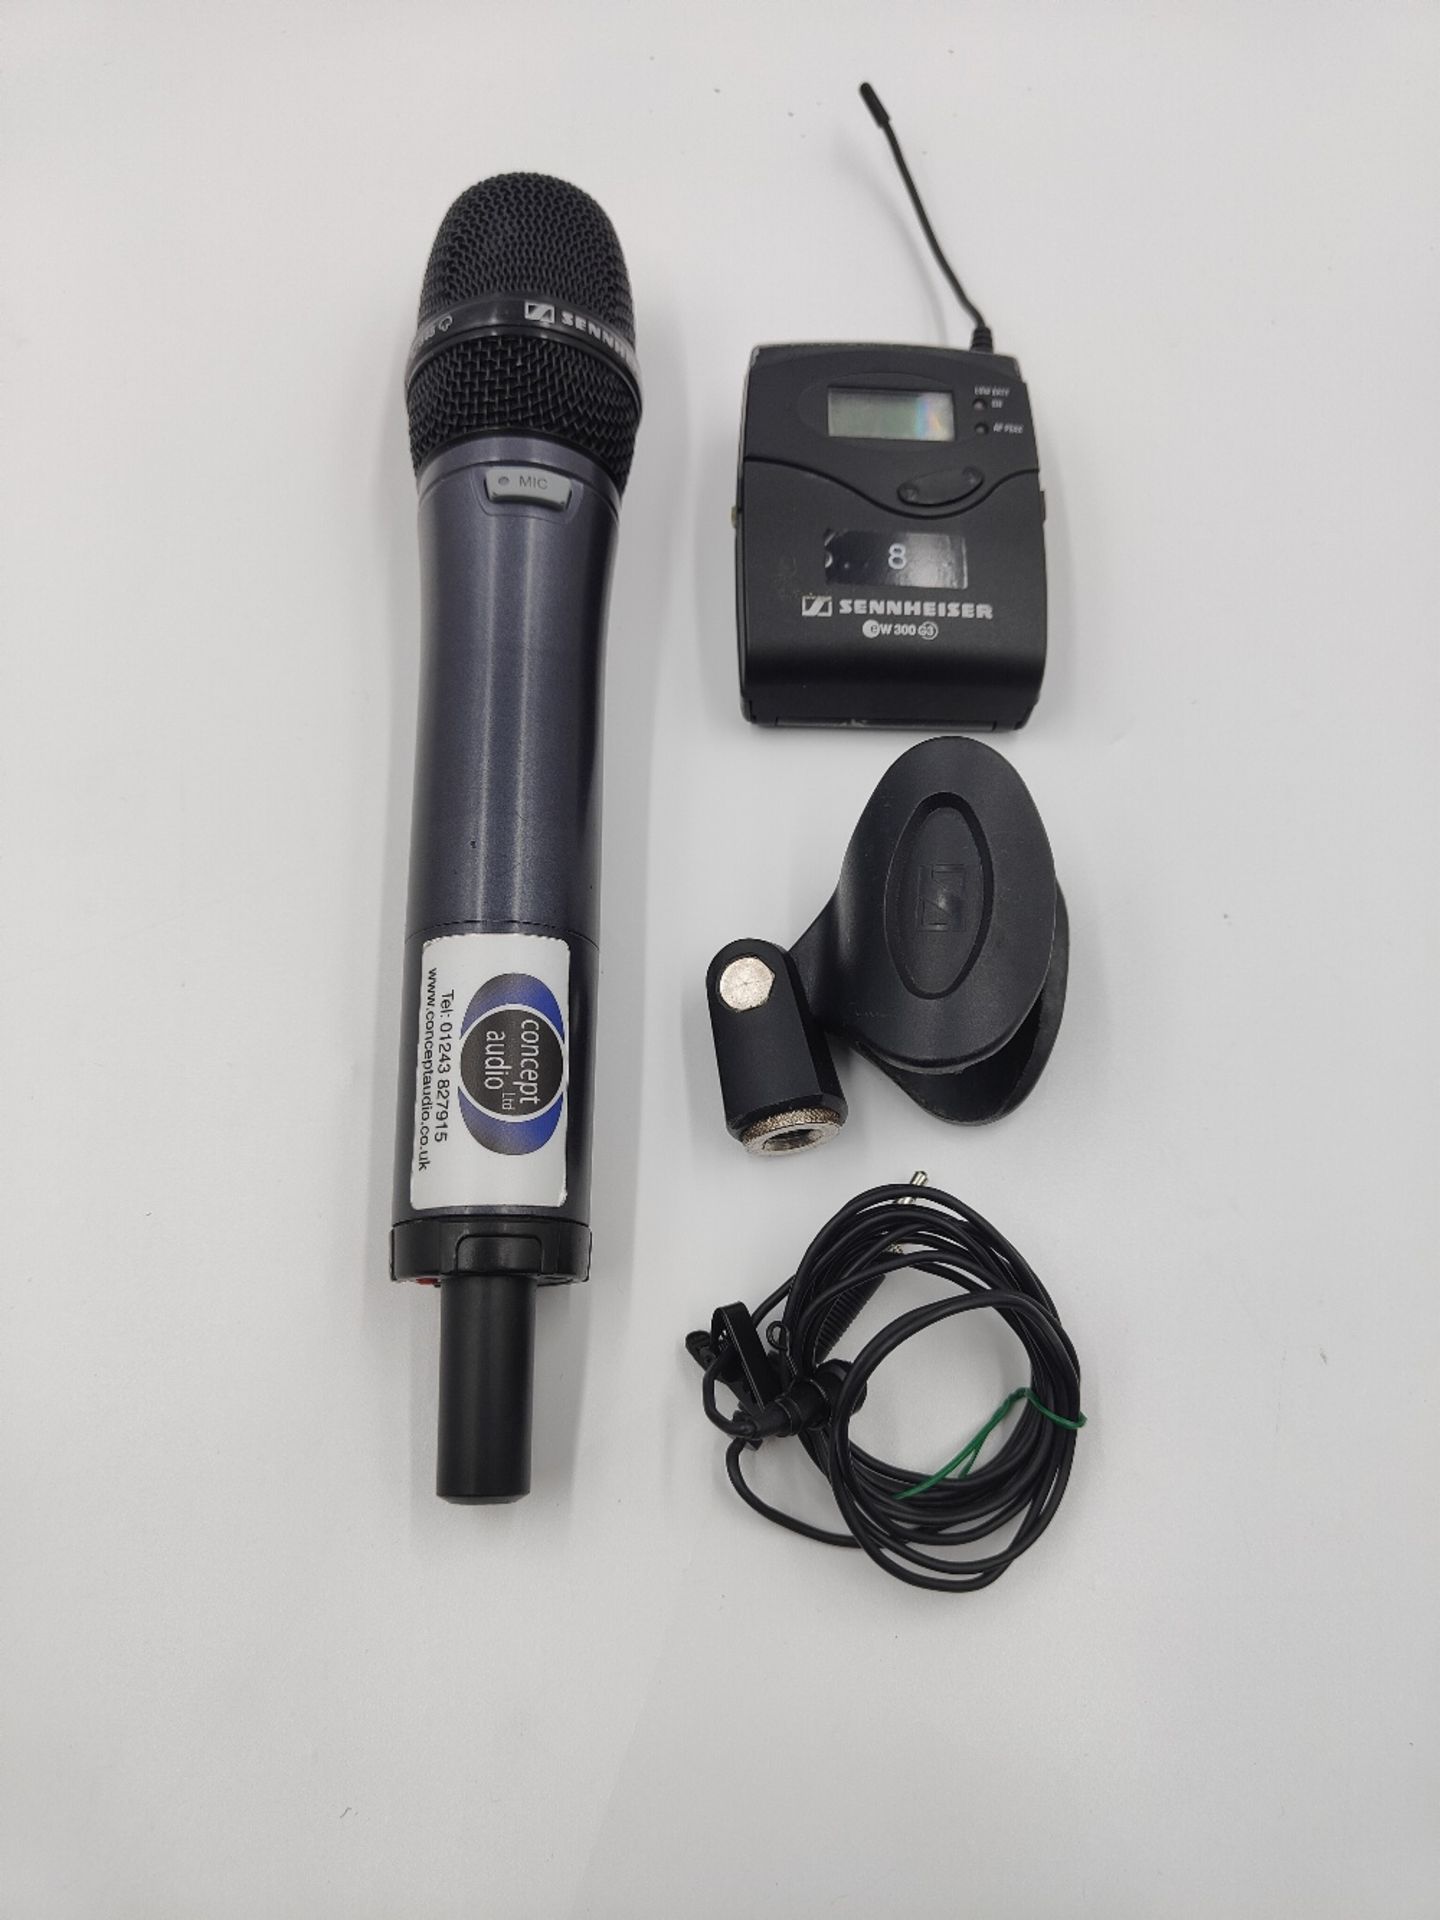 Sennheiser EW300 G3 Microphone and Receiver Kit - Image 2 of 4